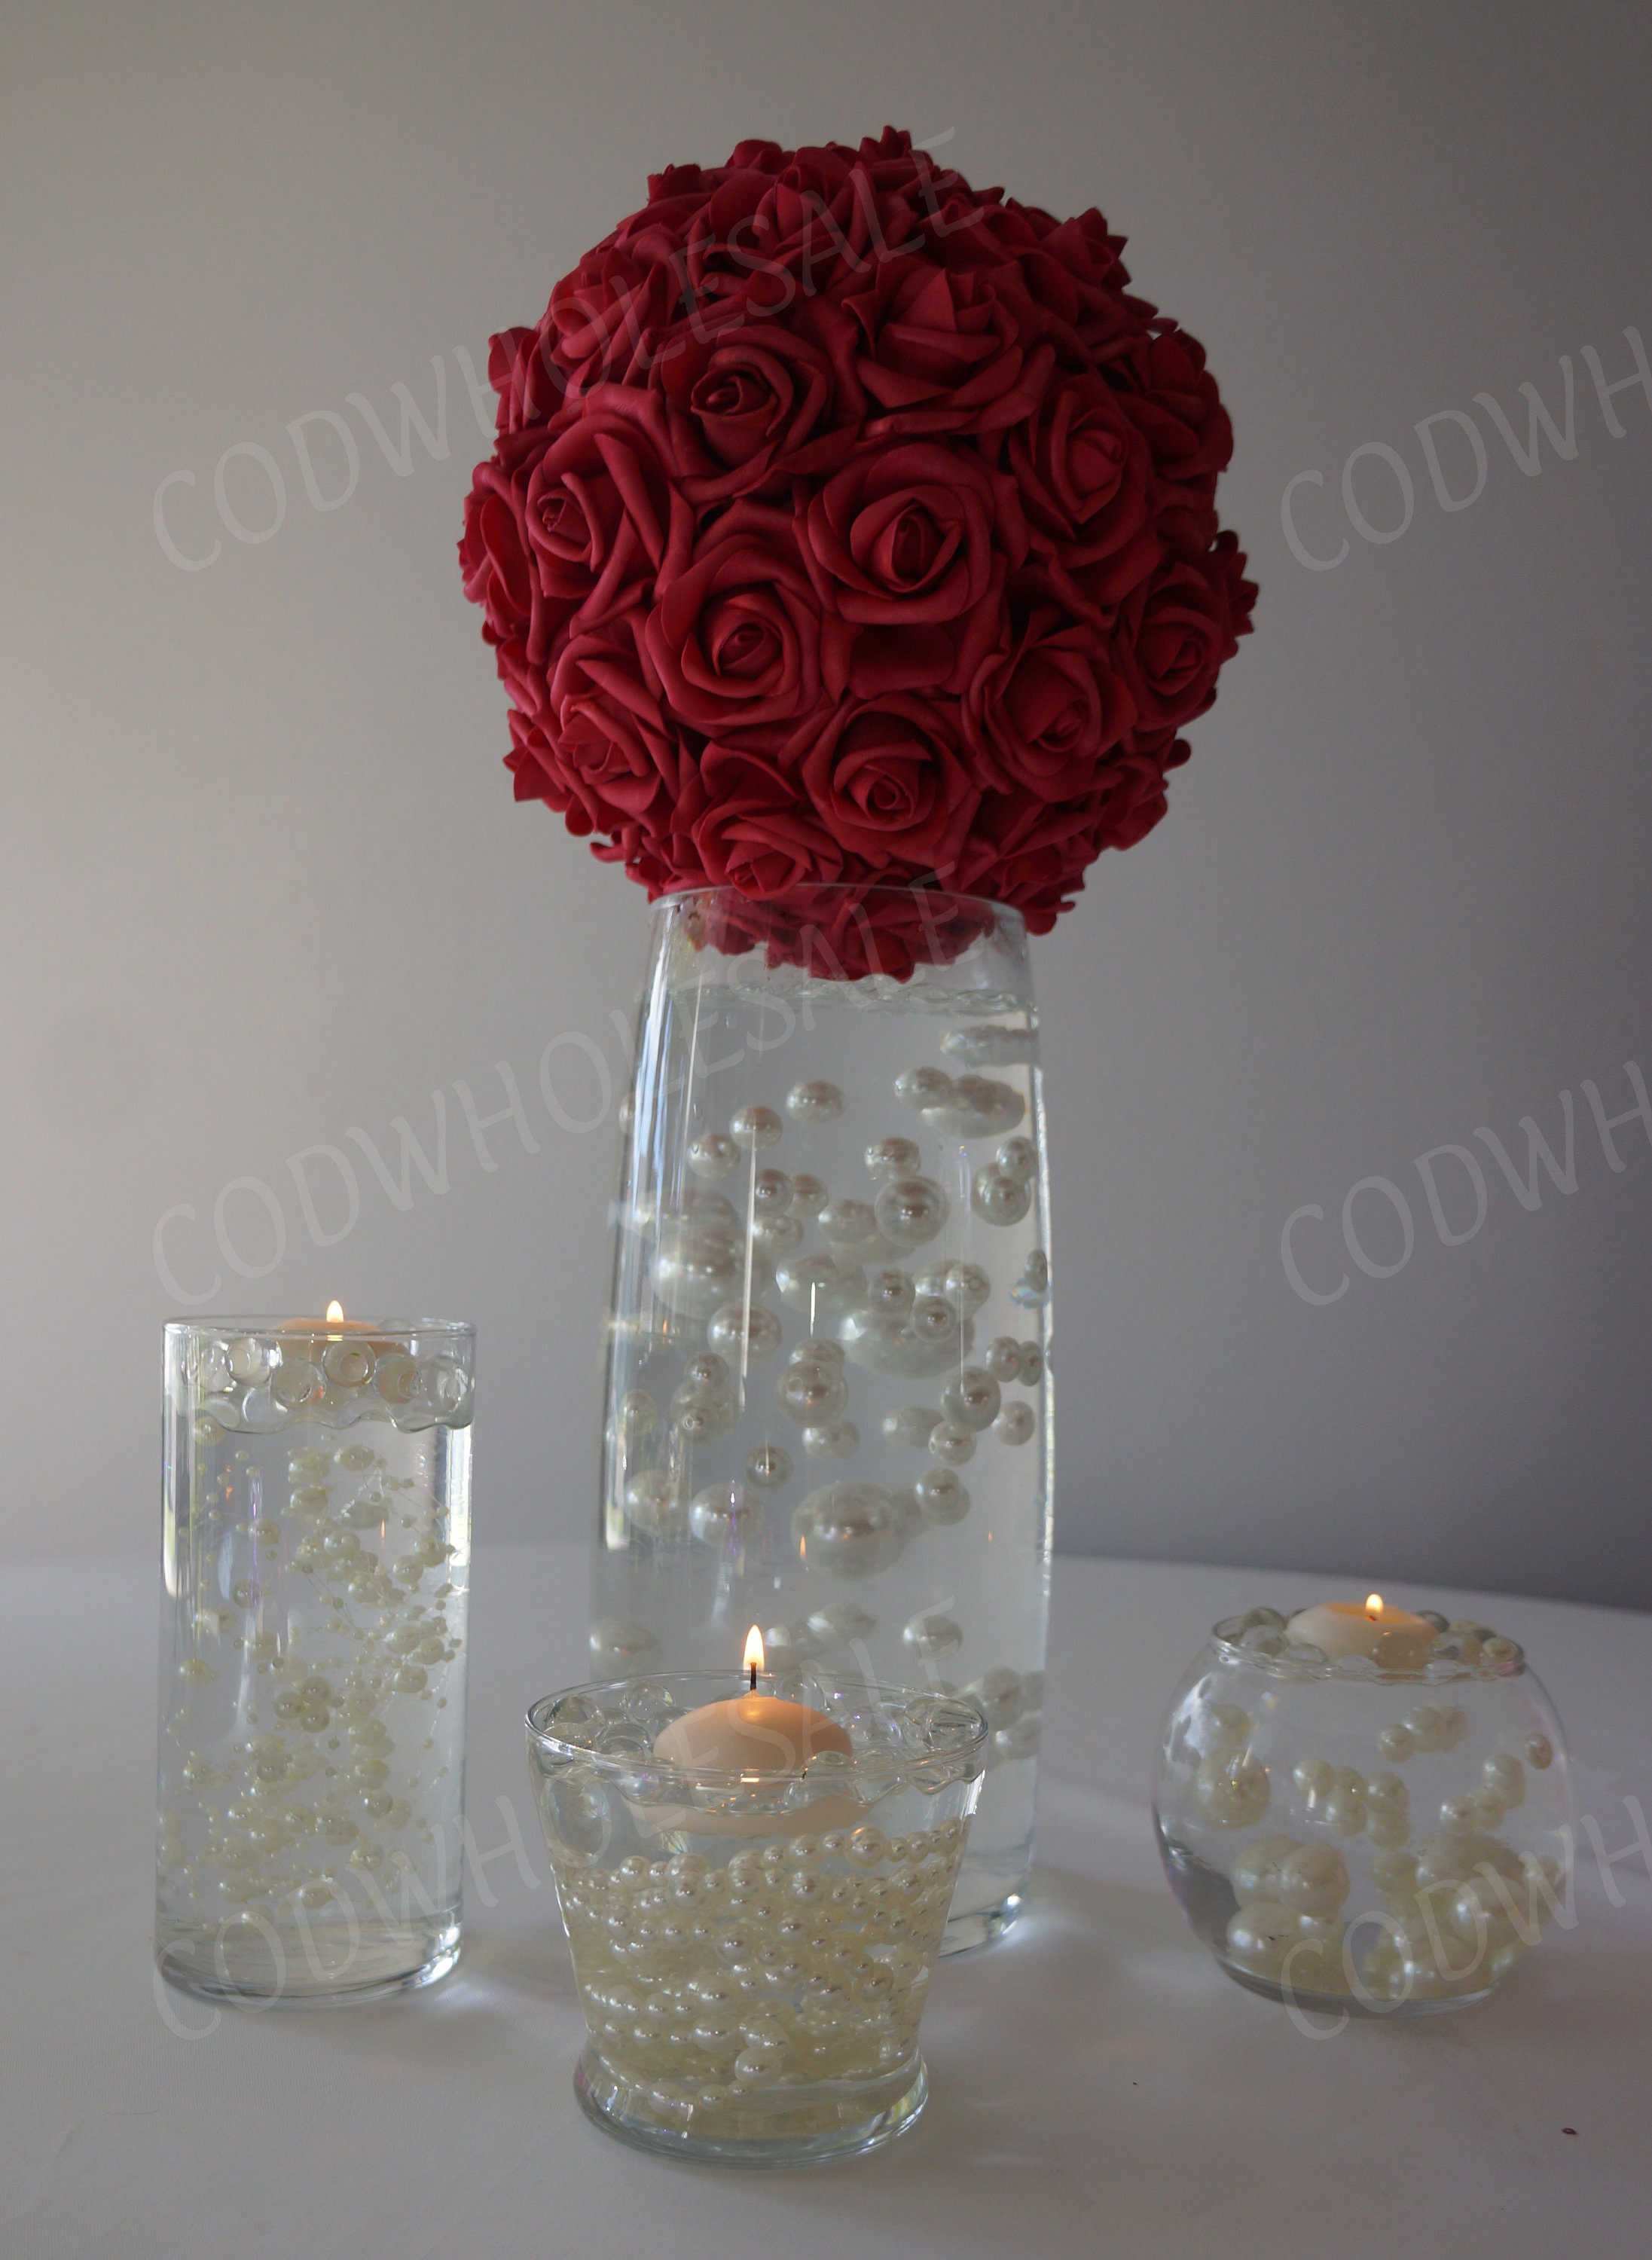 Red Foam Rose Soft Touch Flower Ball, Red Pomander Flower Ball, Foam Rose  Flower Balls, Hanging Foam Pomander Flower Ball -  Canada